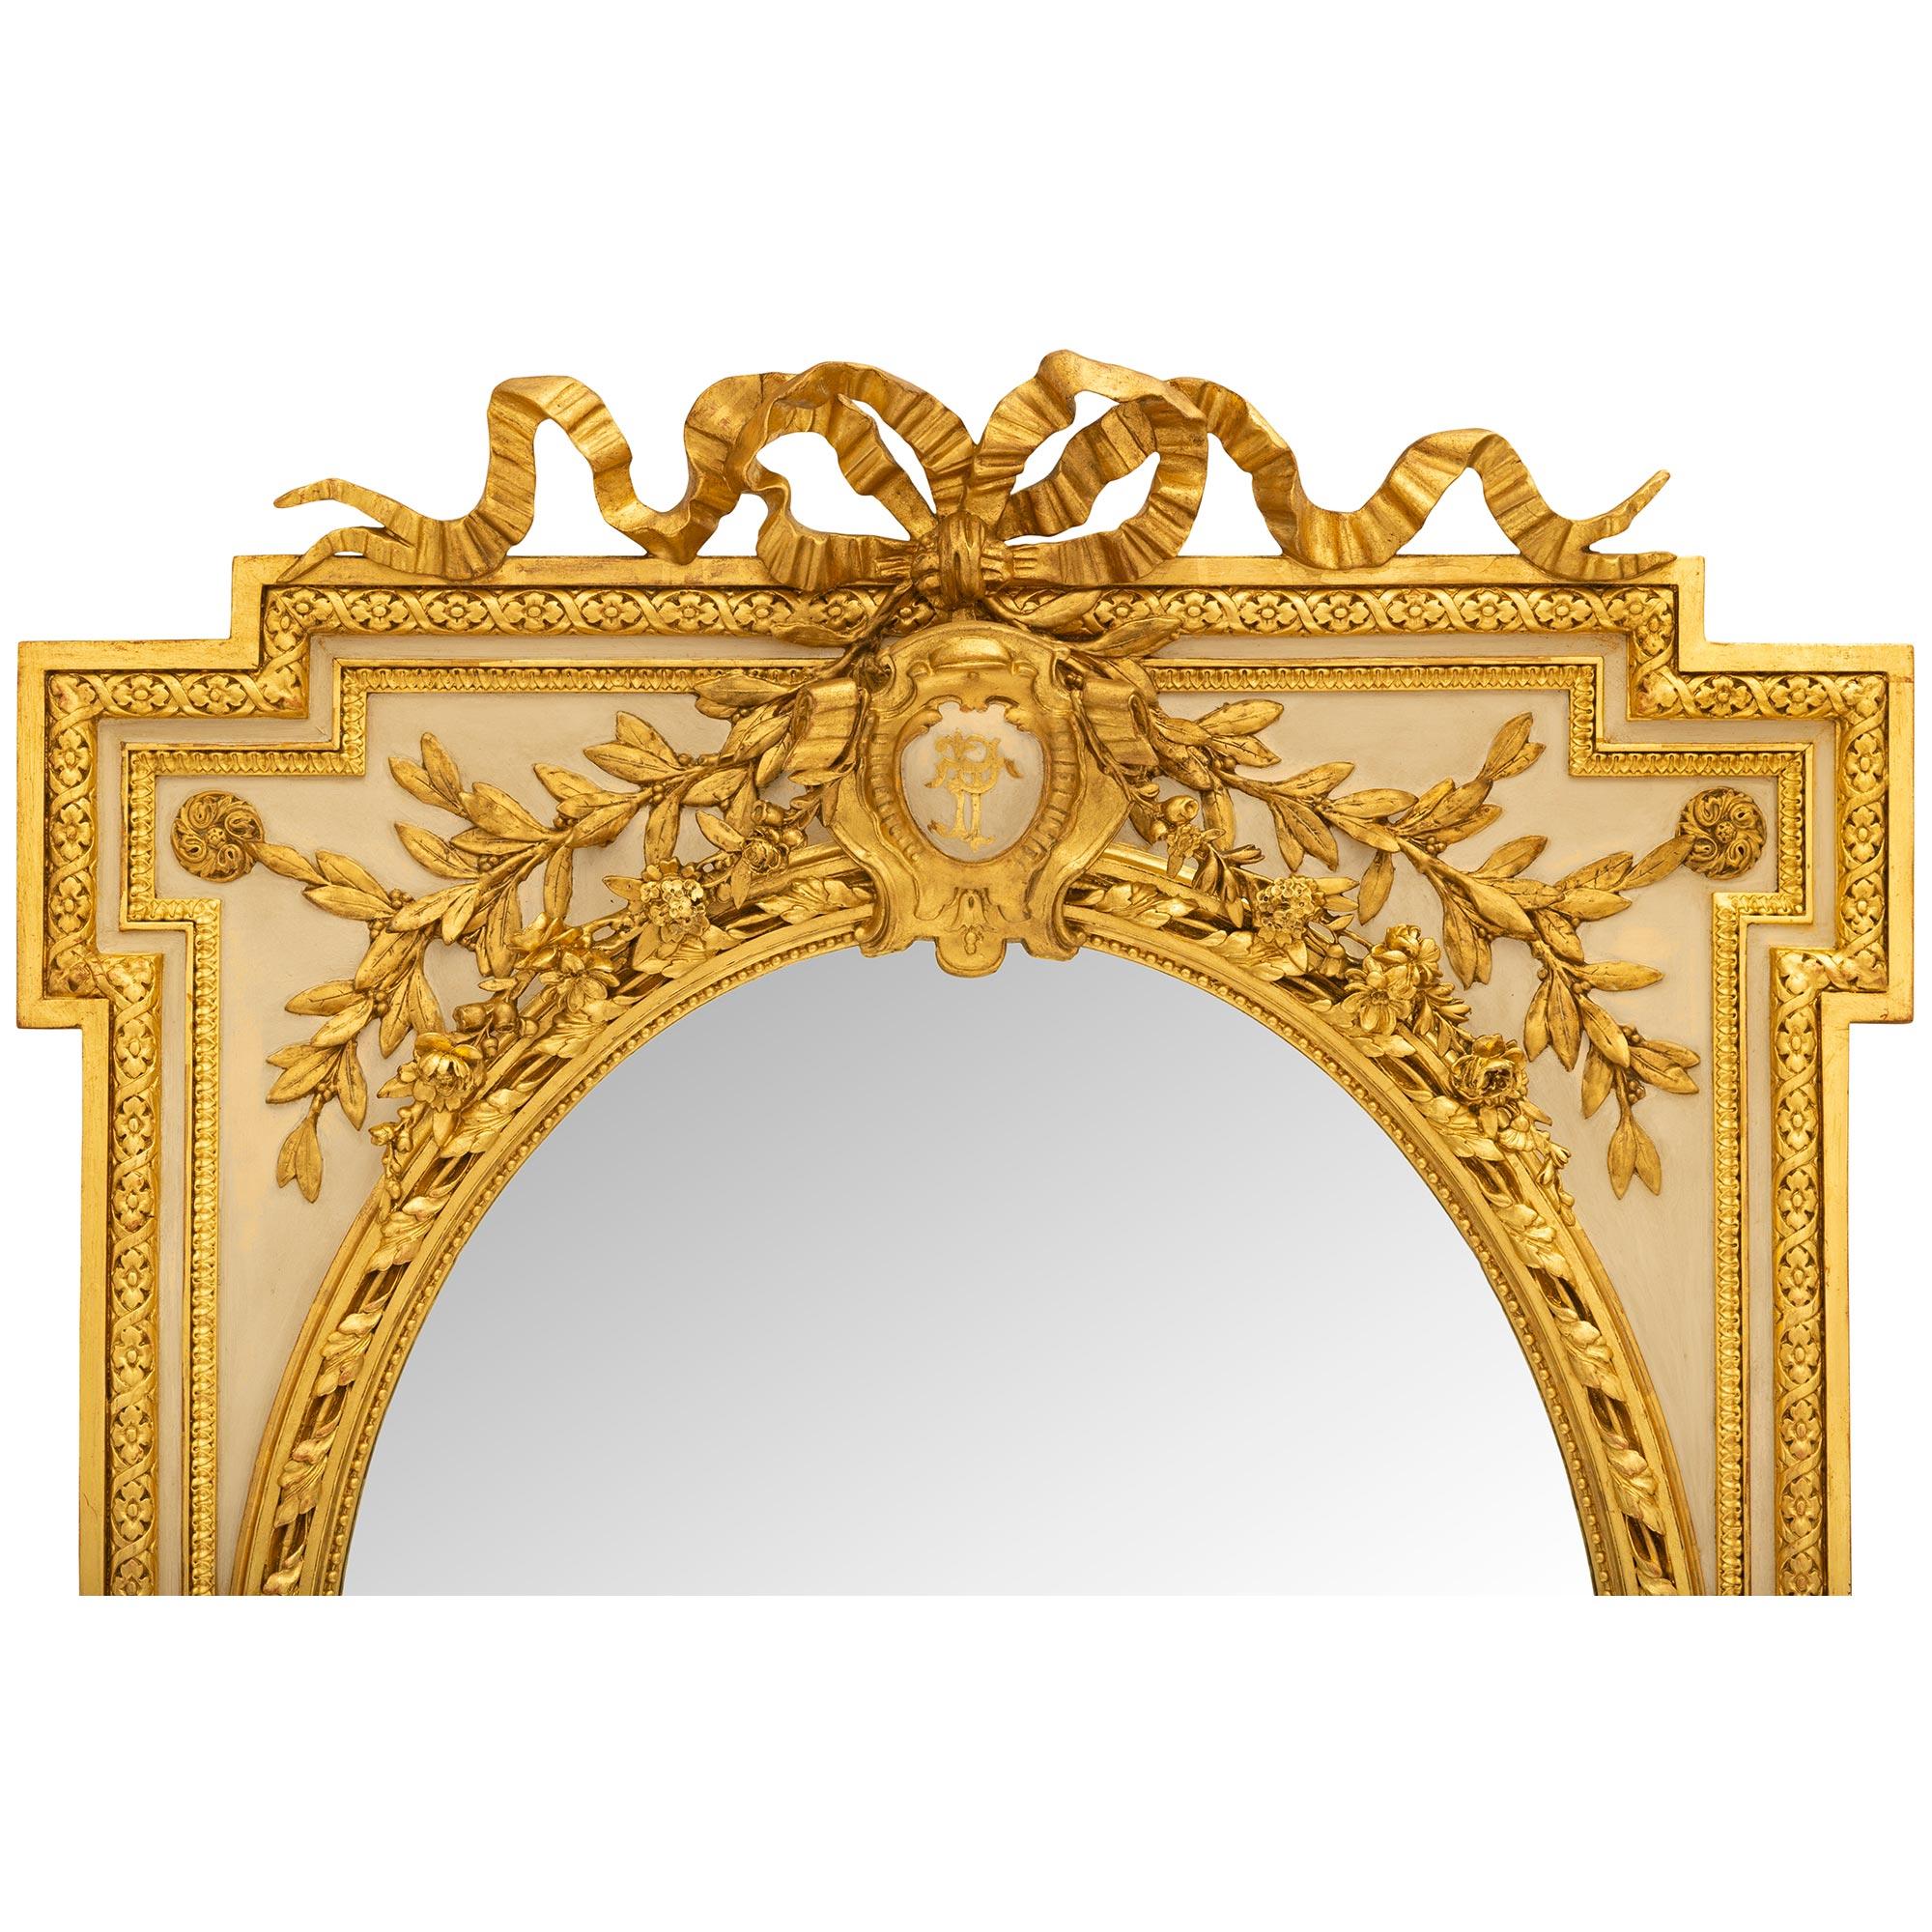 A stunning French 19th century Louis XVI st. Patinated and Giltwood mirror. The original oval mirror is framed within a beaded inner frame with an outer twisted foliate designed band. Below the oval mirror are two scrolled acanthus leaf Giltwood